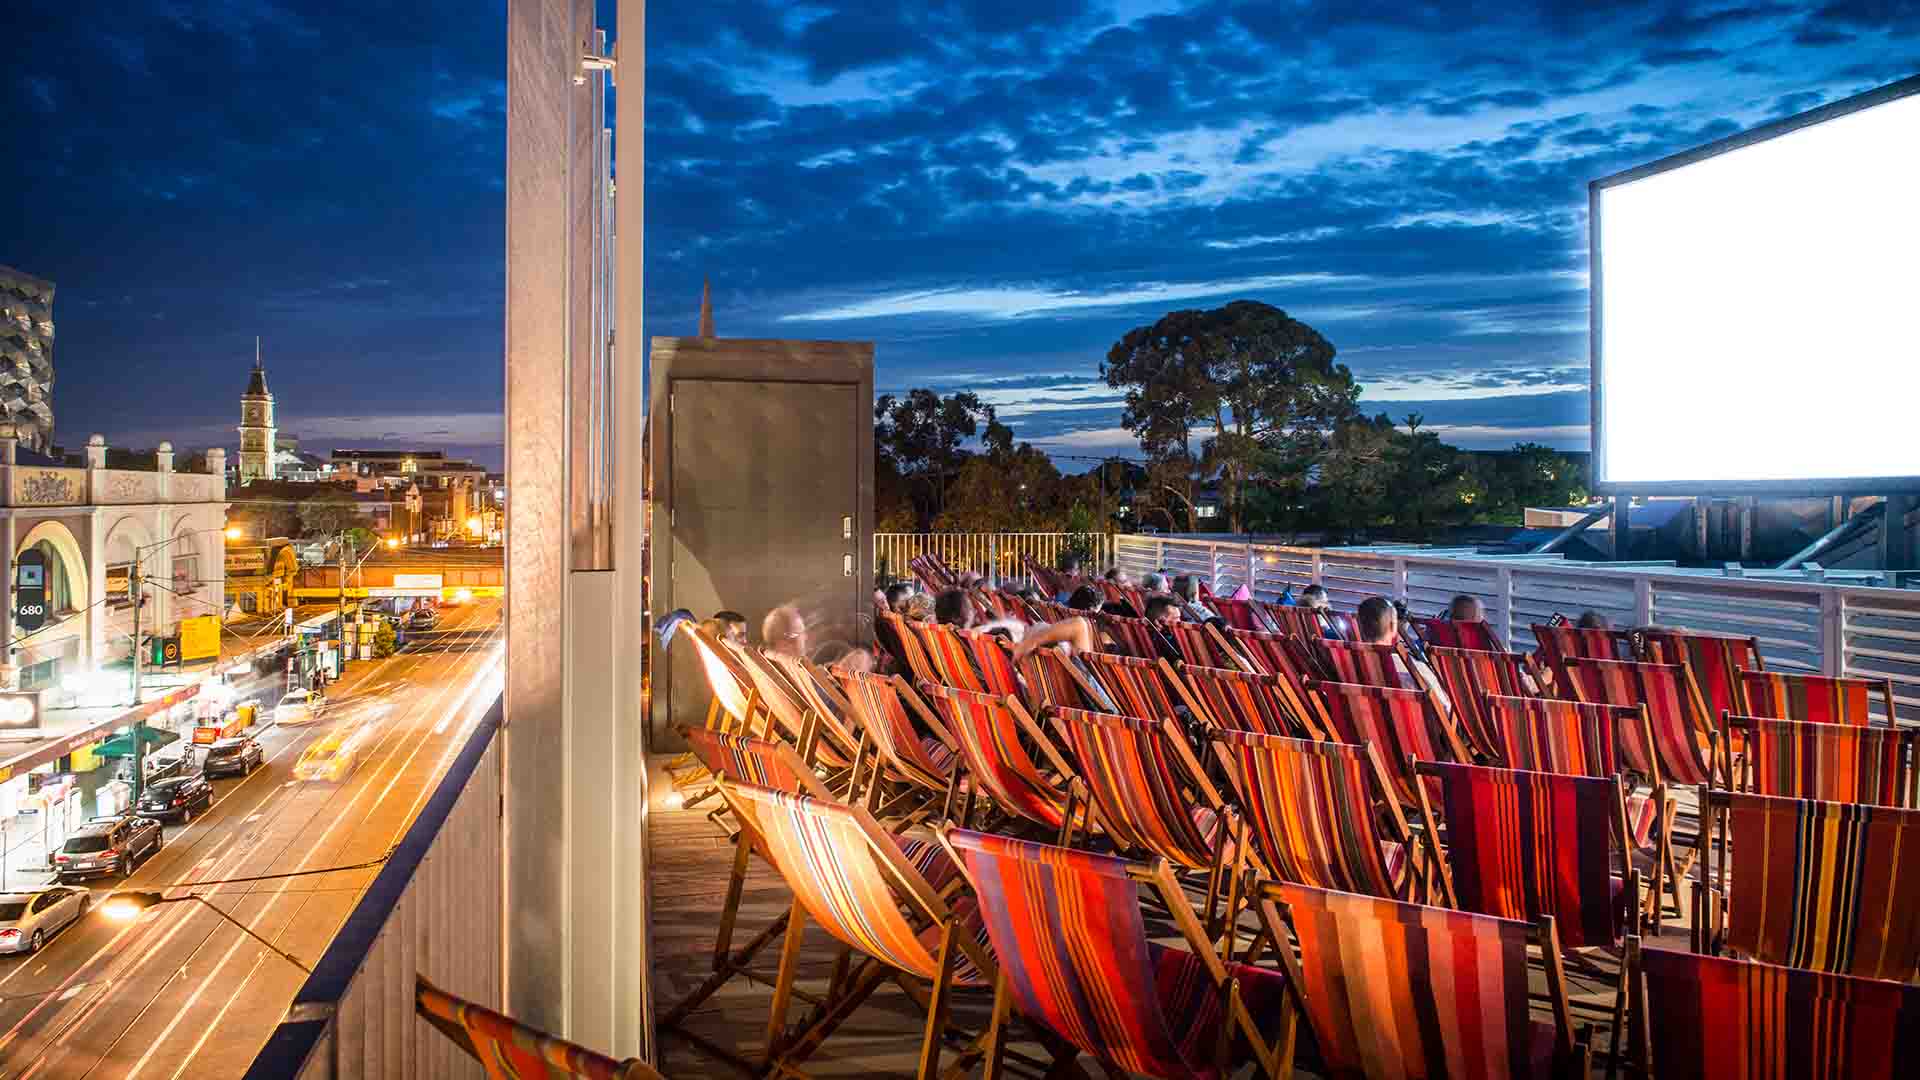 Lido on the Roof and Cameo Outdoor Cinema Have Announced Their Late-October Reopening Lineups